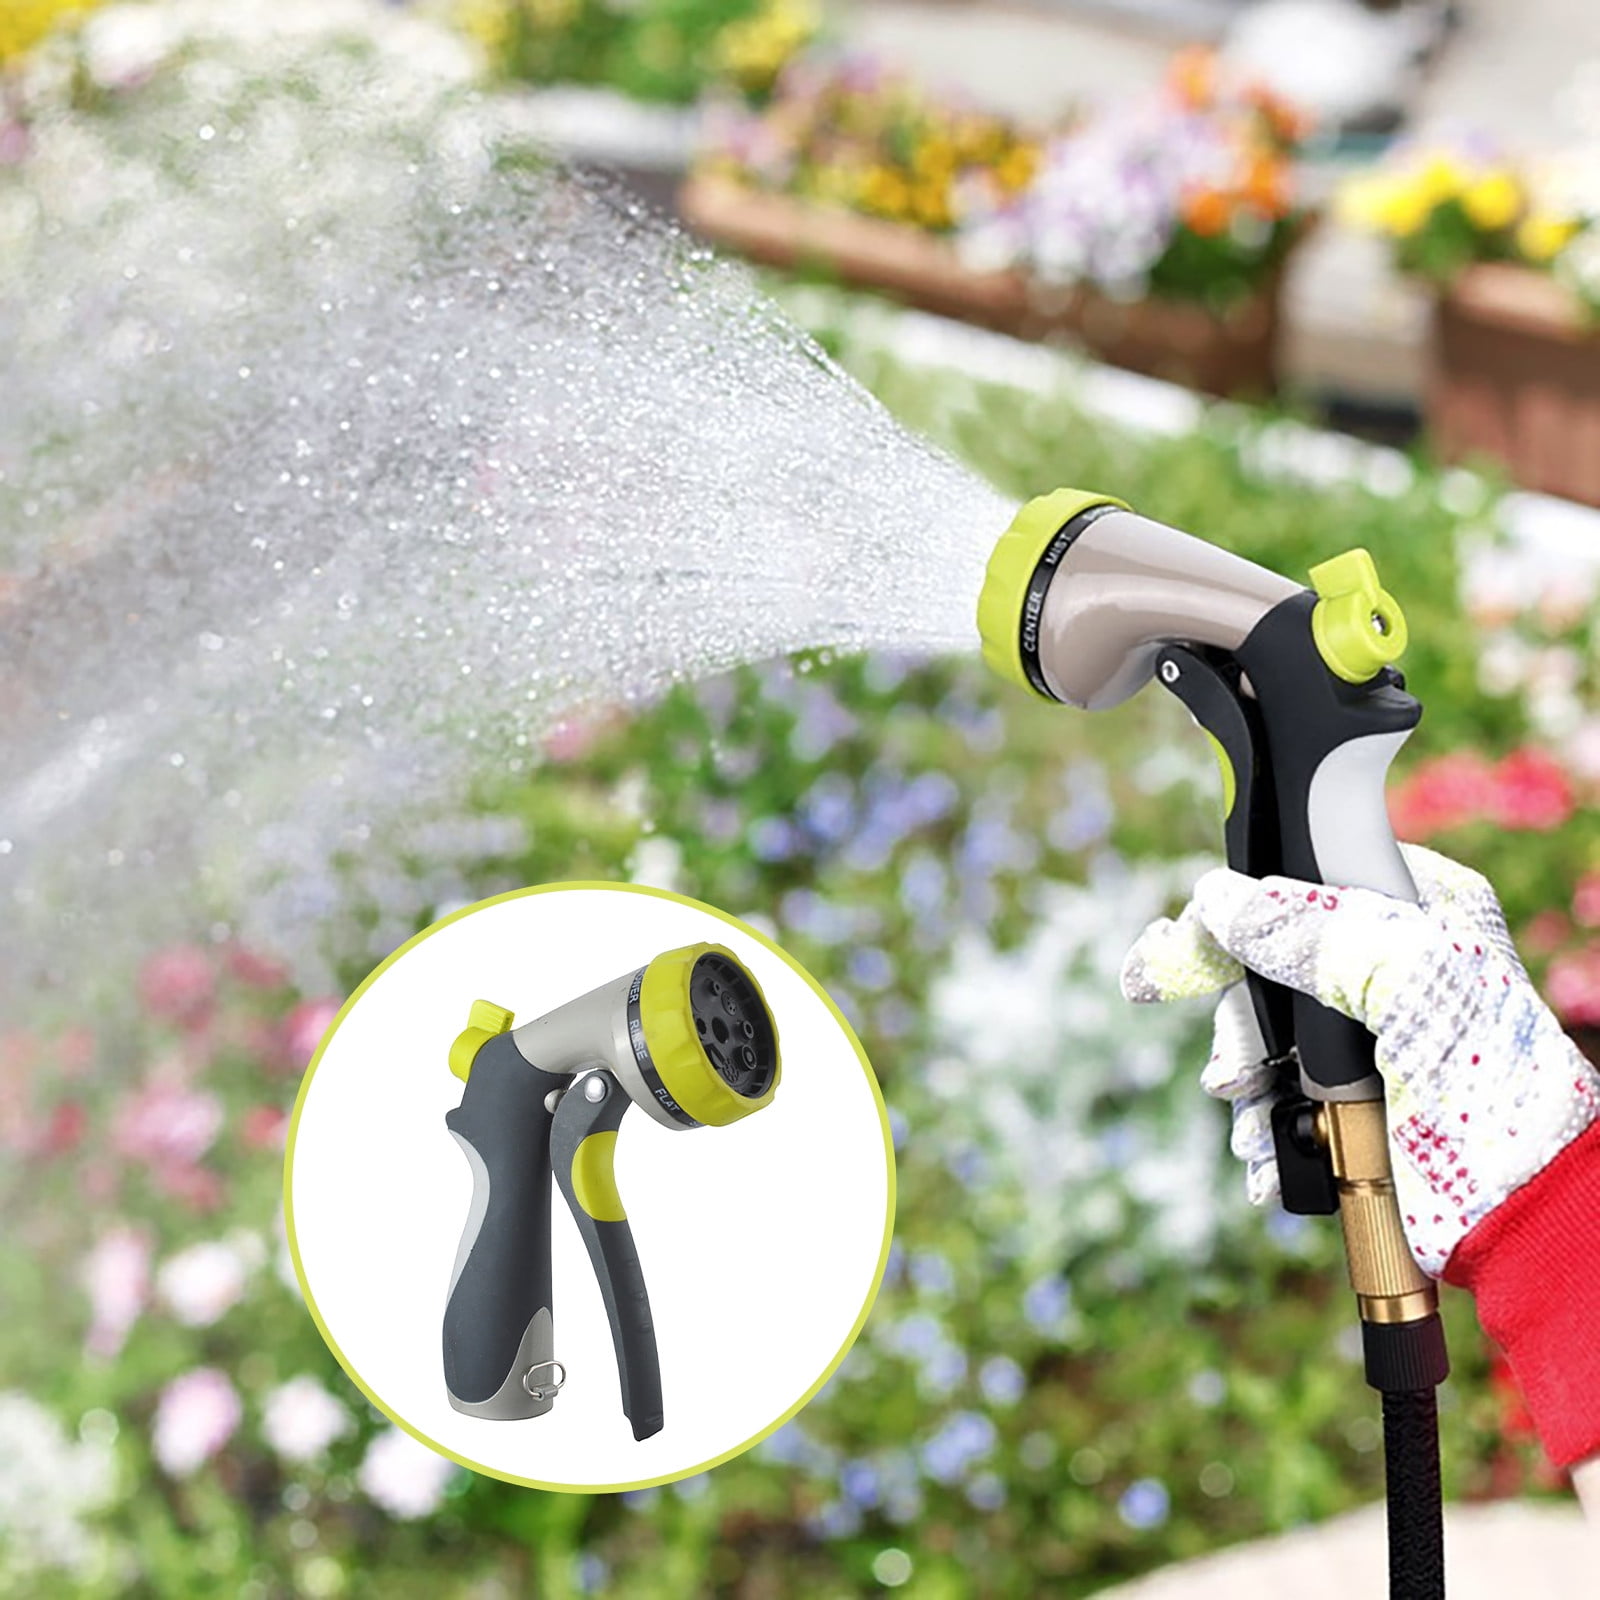 VicTsing Garden Hose Nozzle Spray Nozzle Car Wash and Showering Pets Cleaning Slip and Shock Resistant for Watering Plants Metal Water Nozzle with Heavy Duty 8 Adjustable Watering Patterns Green 